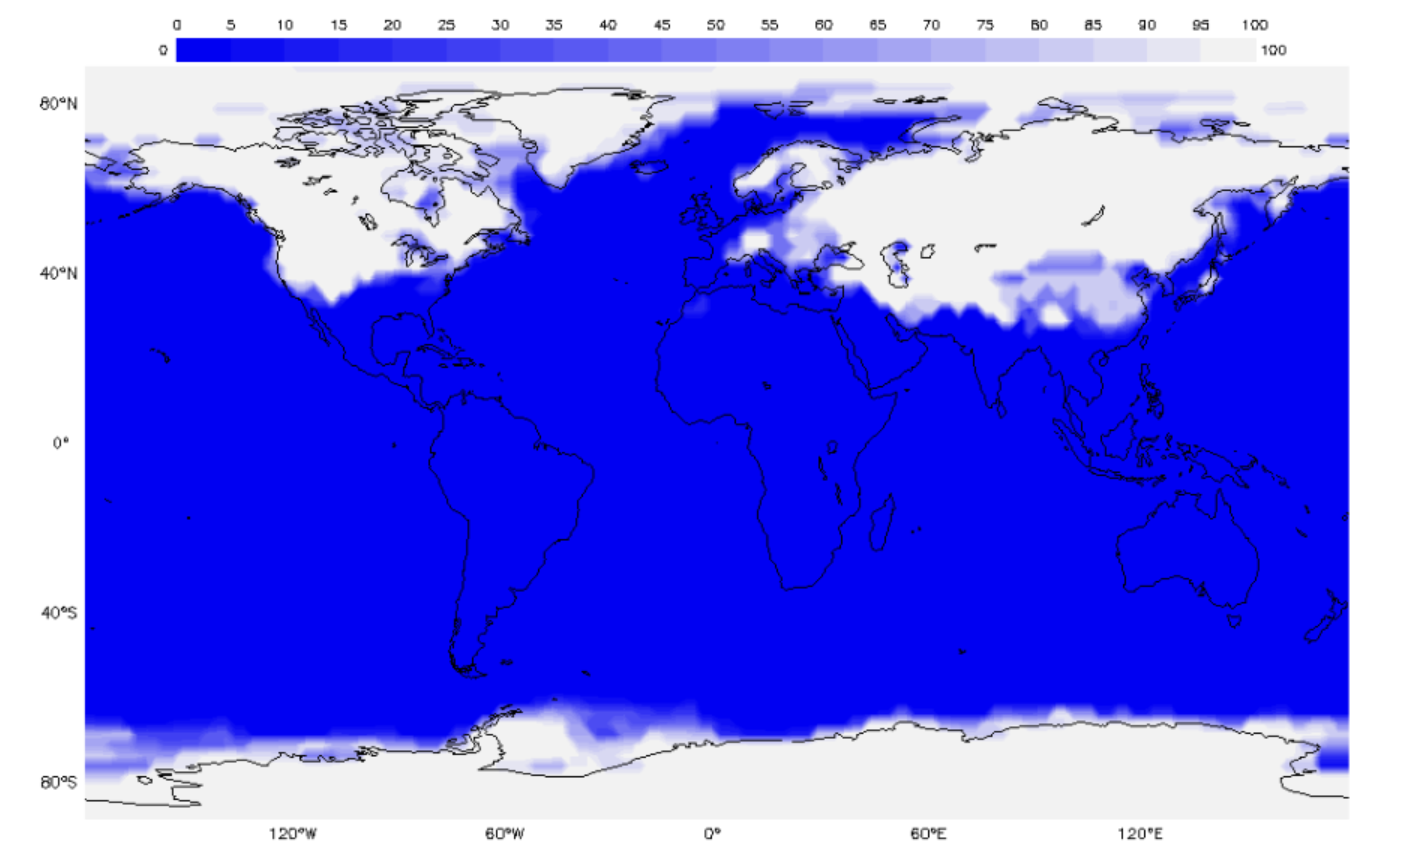 Monthly Snow/Ice Percent Coverage. Source: NOAA PMEL